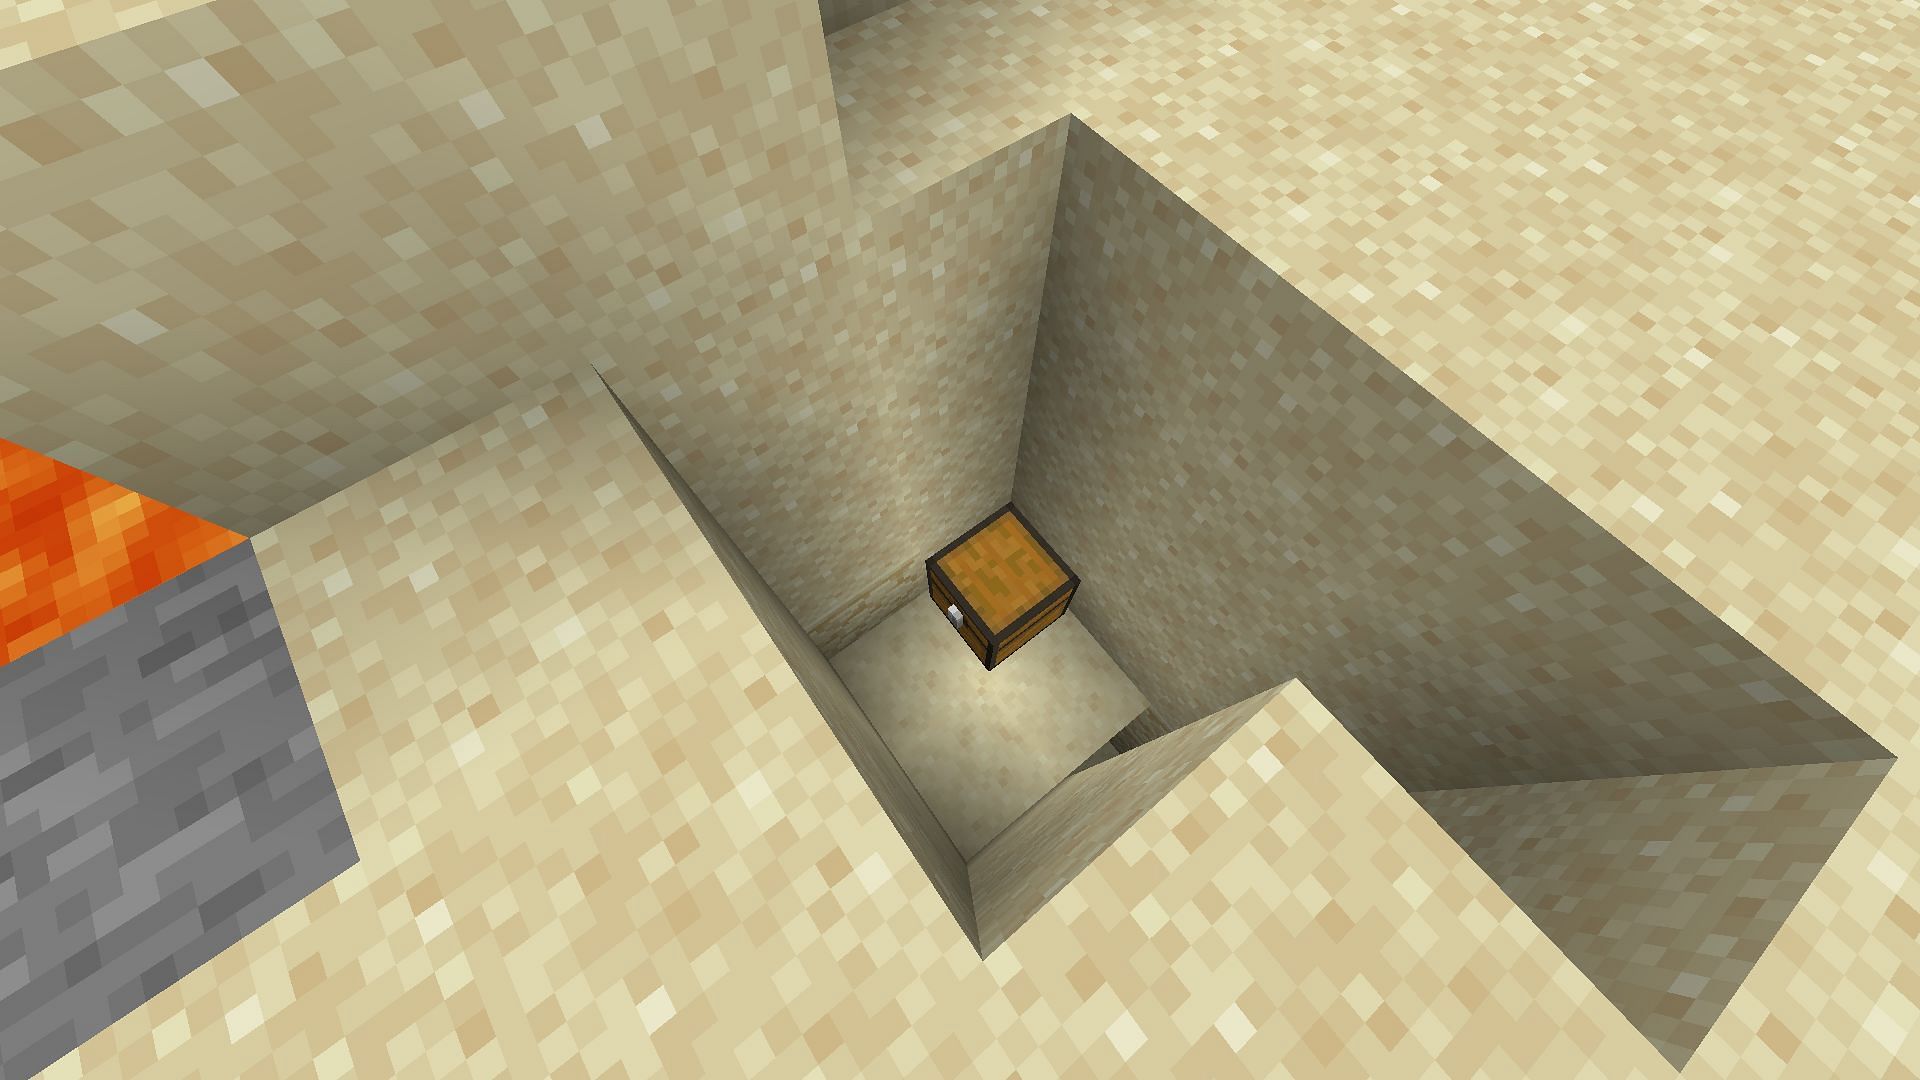 Several chest loot scattered around Minecraft world can also generate Looting enchantment book (Image via Mojang)